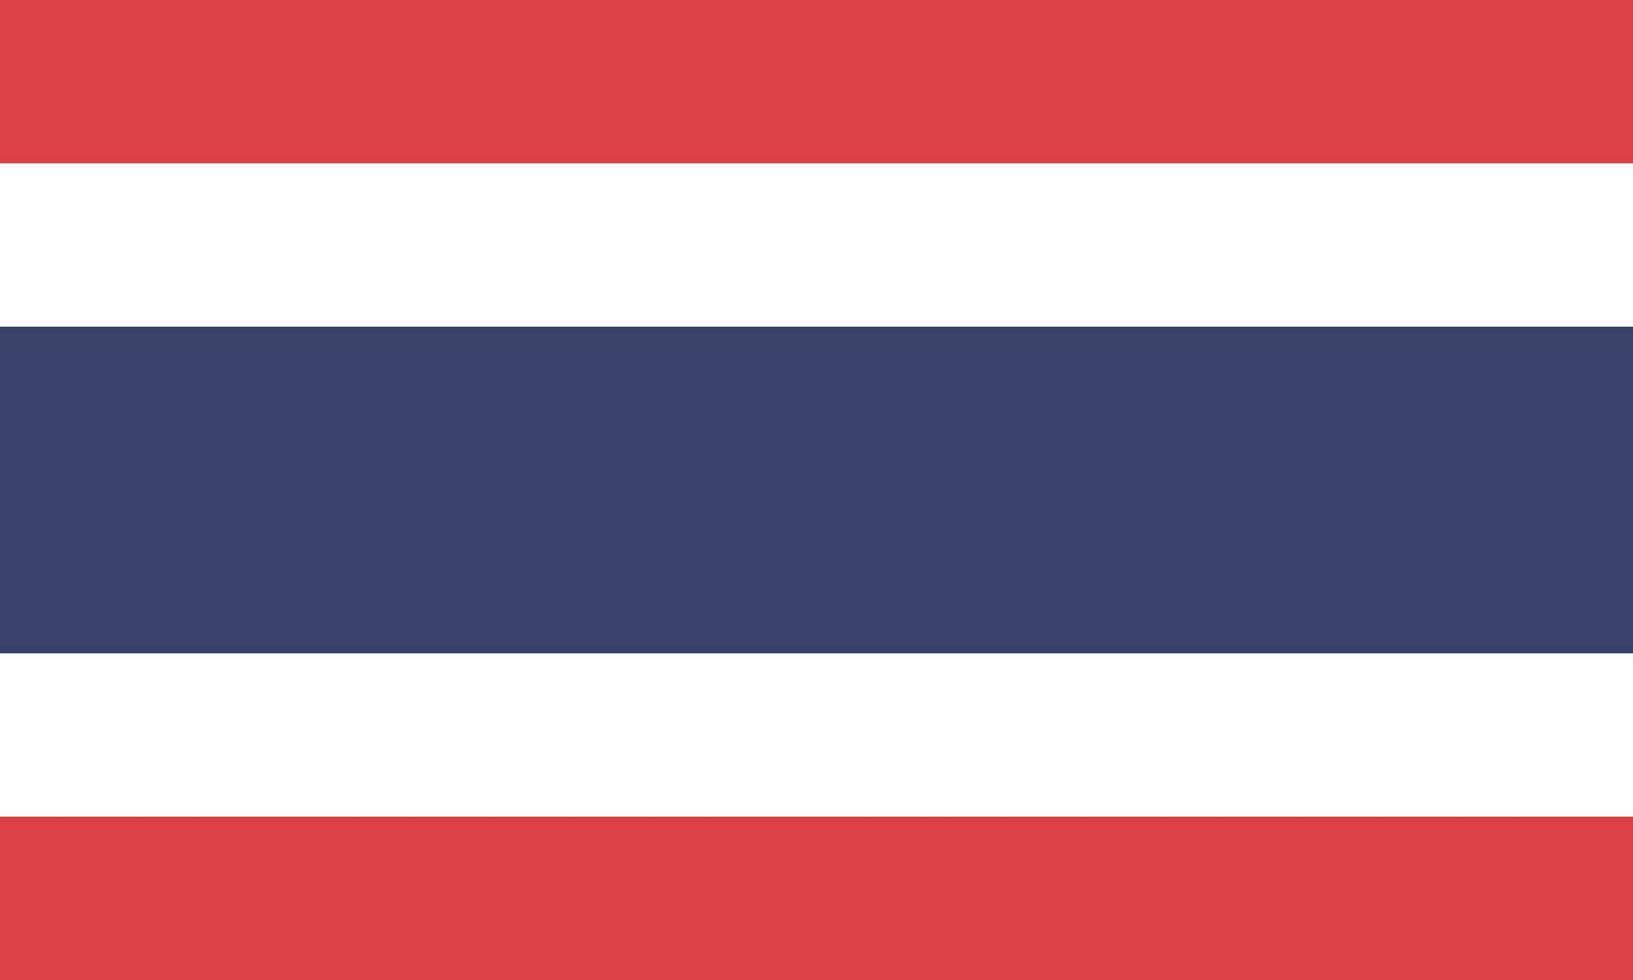 National Thailand flag, official colors, and proportions. Vector illustration. EPS 10 Vector.